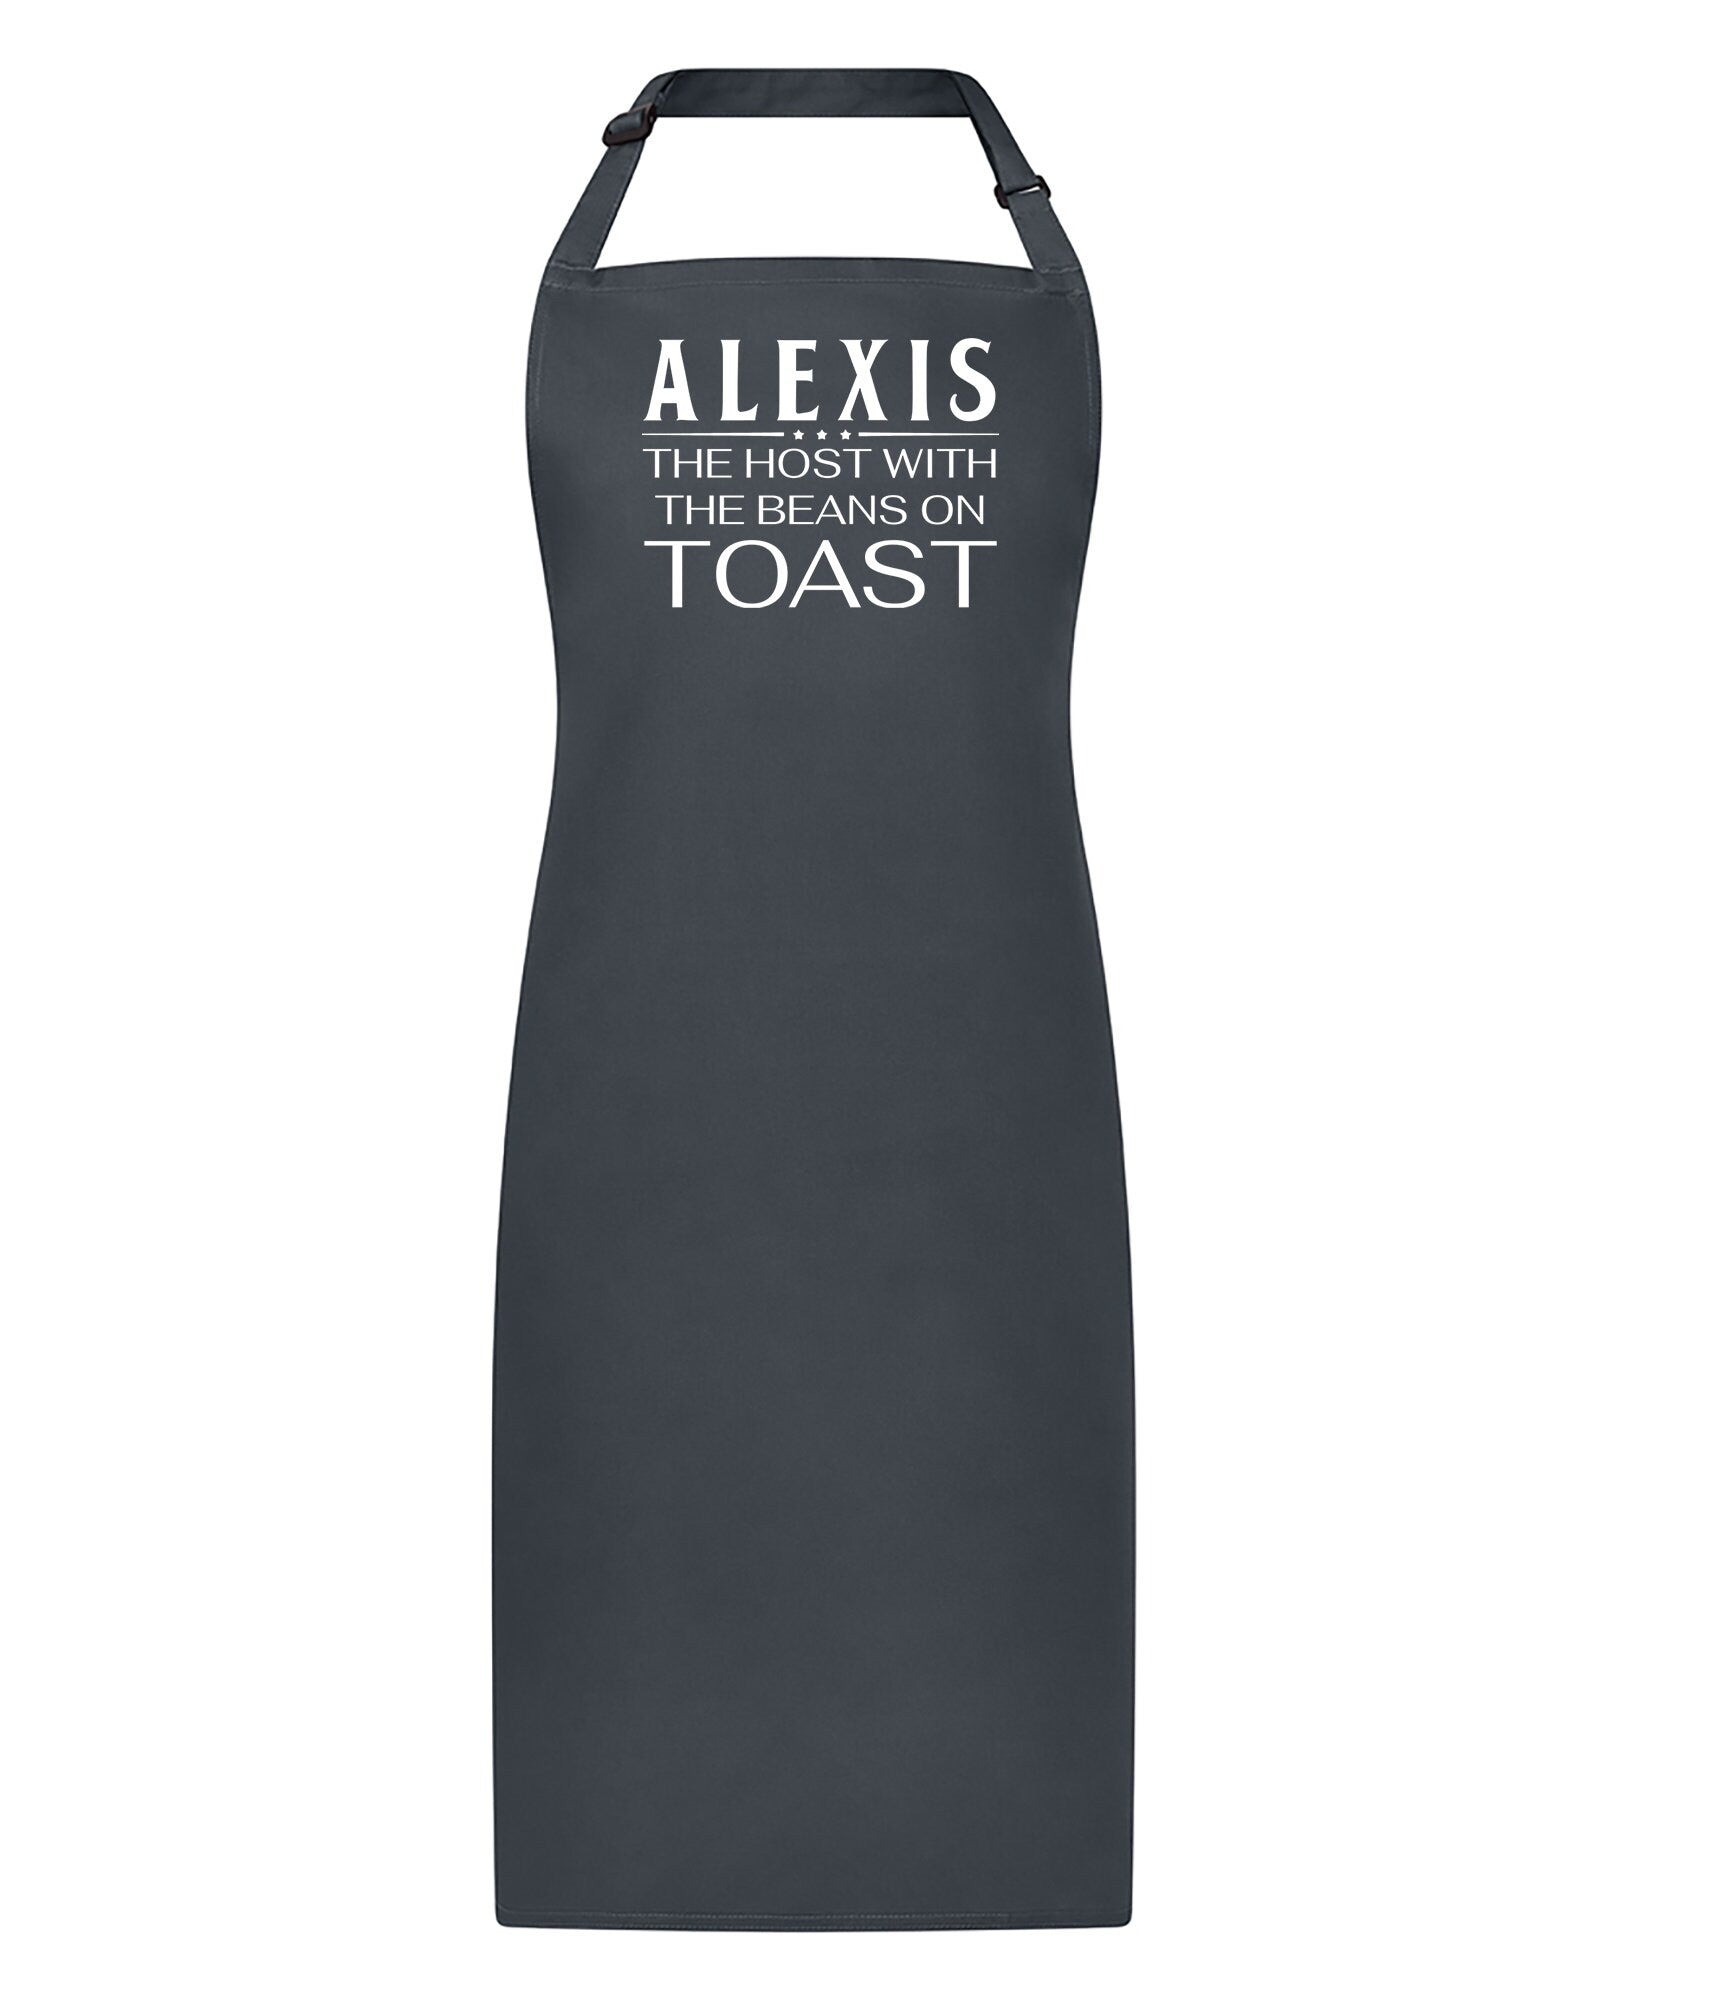 Personalised Apron for Men, Cooking Gift, Funny Chef Apron, Baking Gift for Husband, Dad, Host with the Beans on Toast